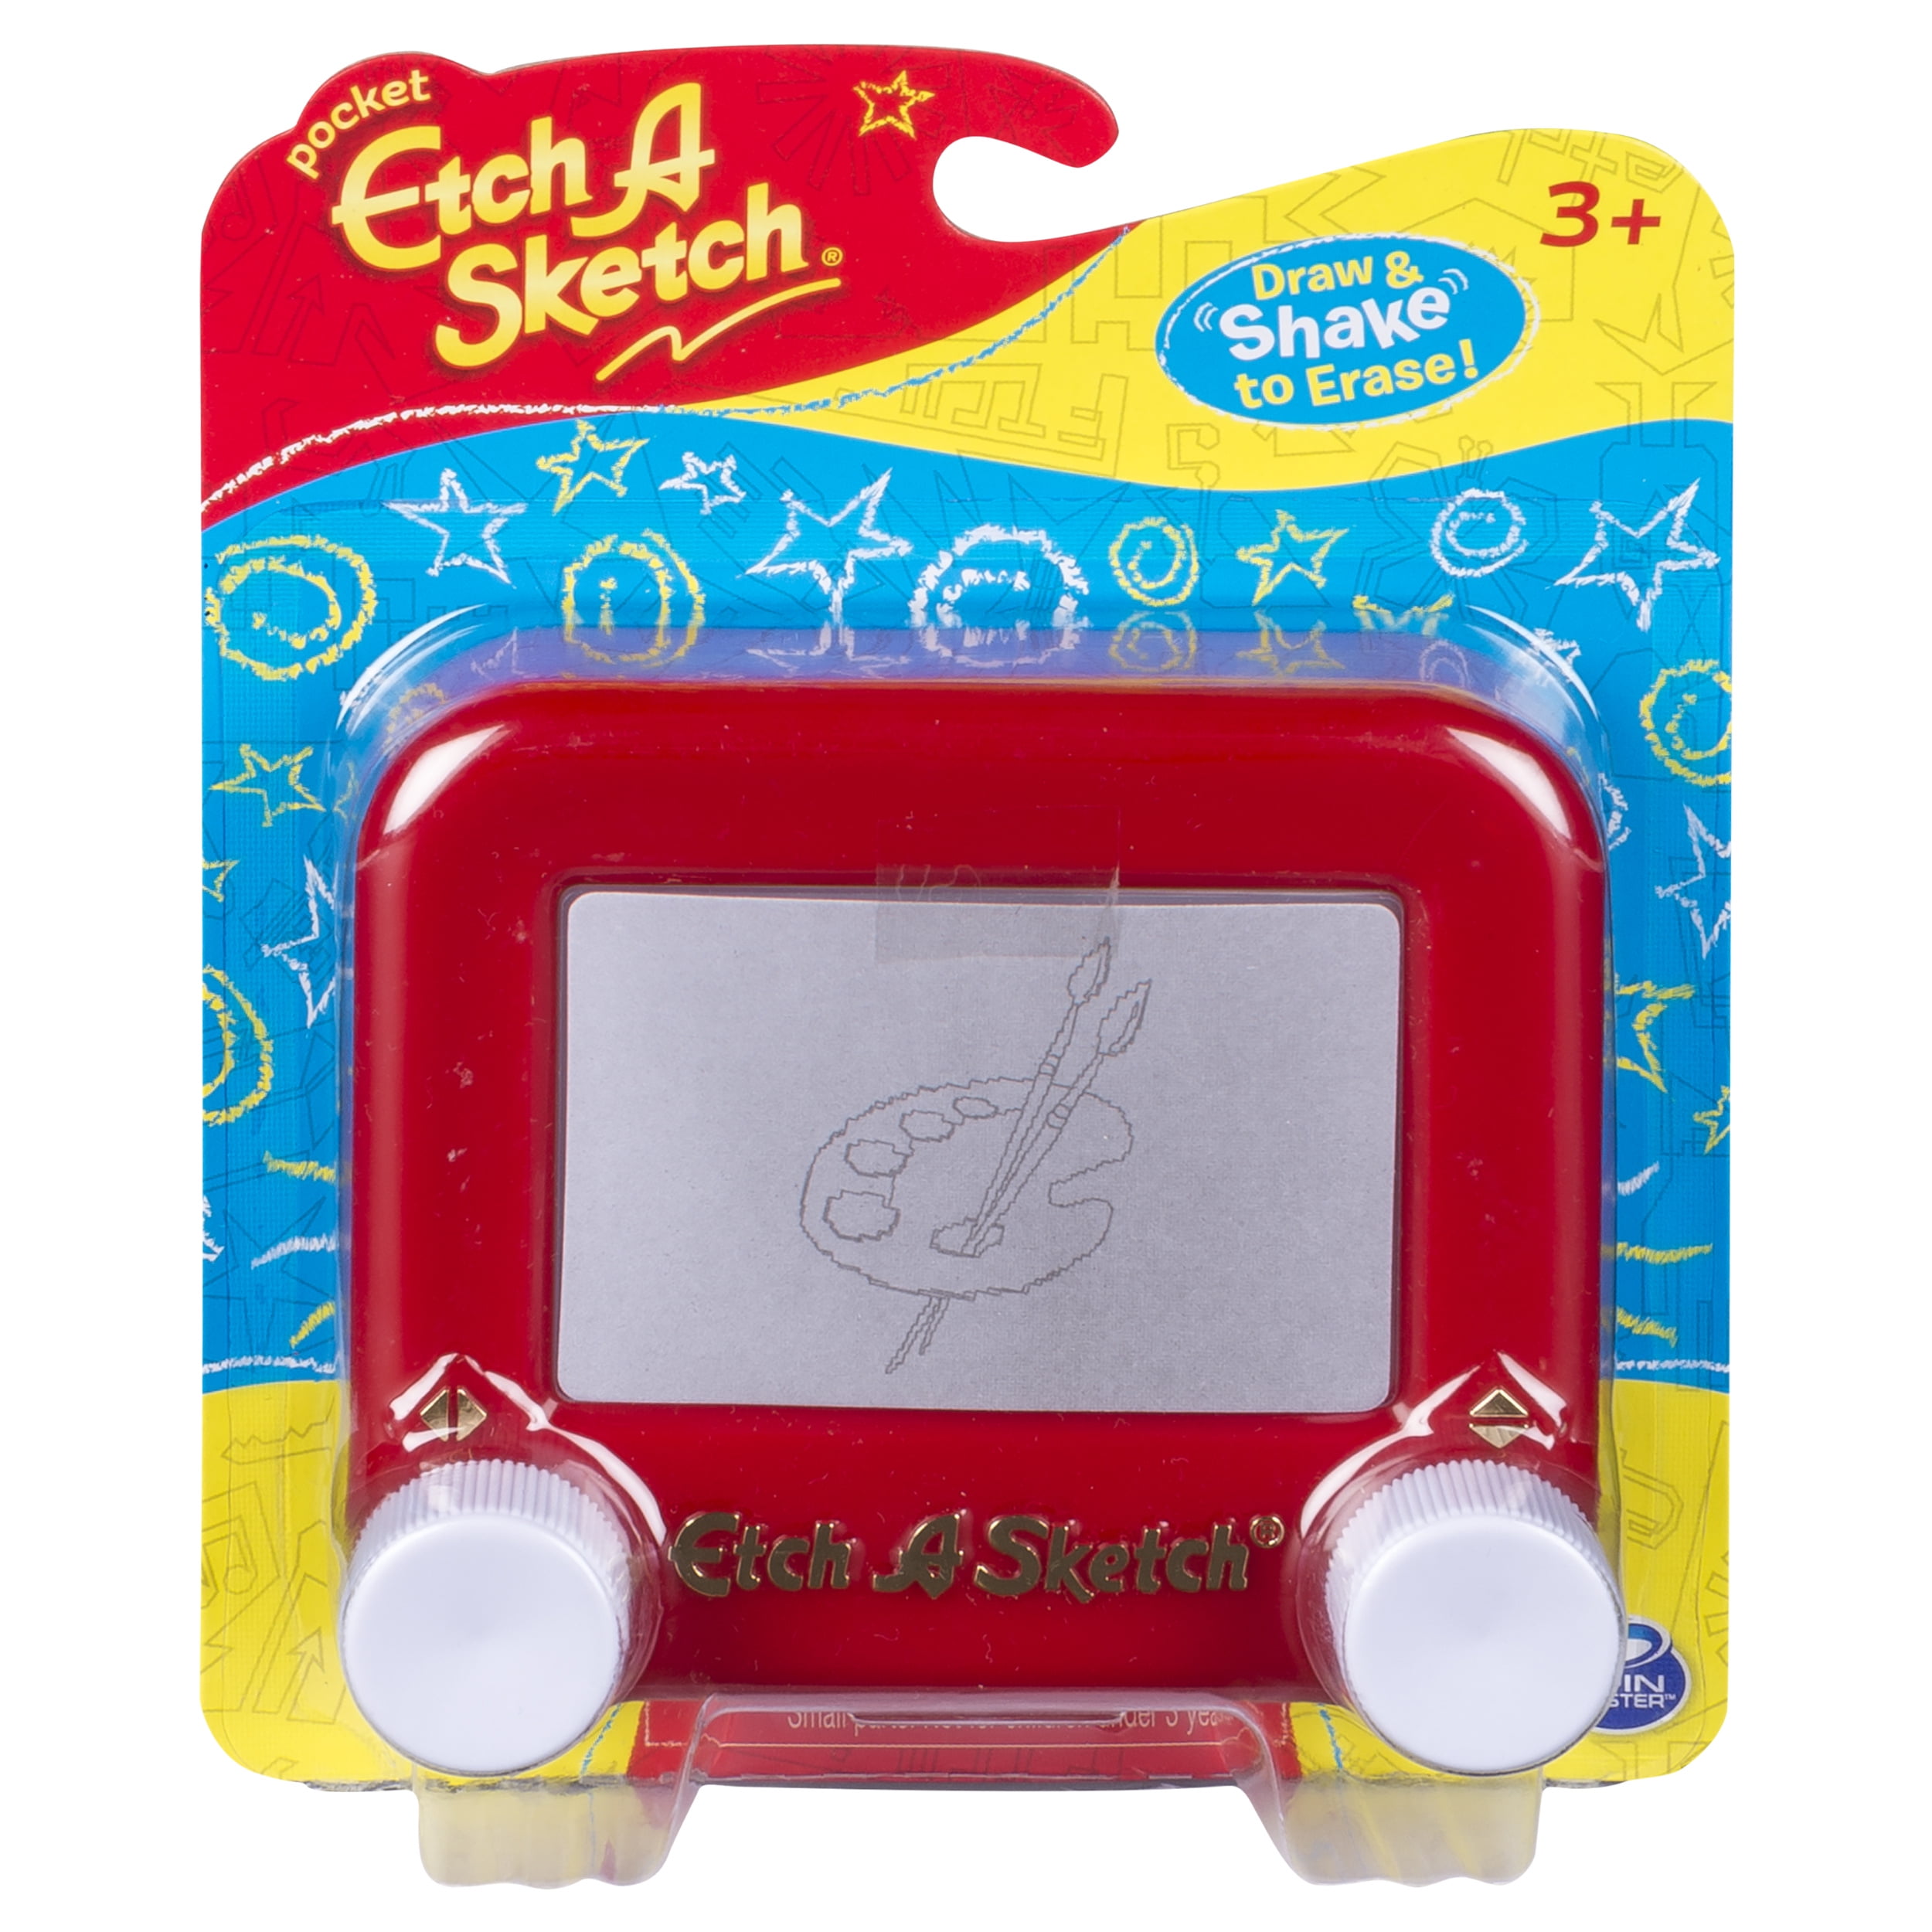 Etch A Sketch turns 50: amazing art created with the drawing toy